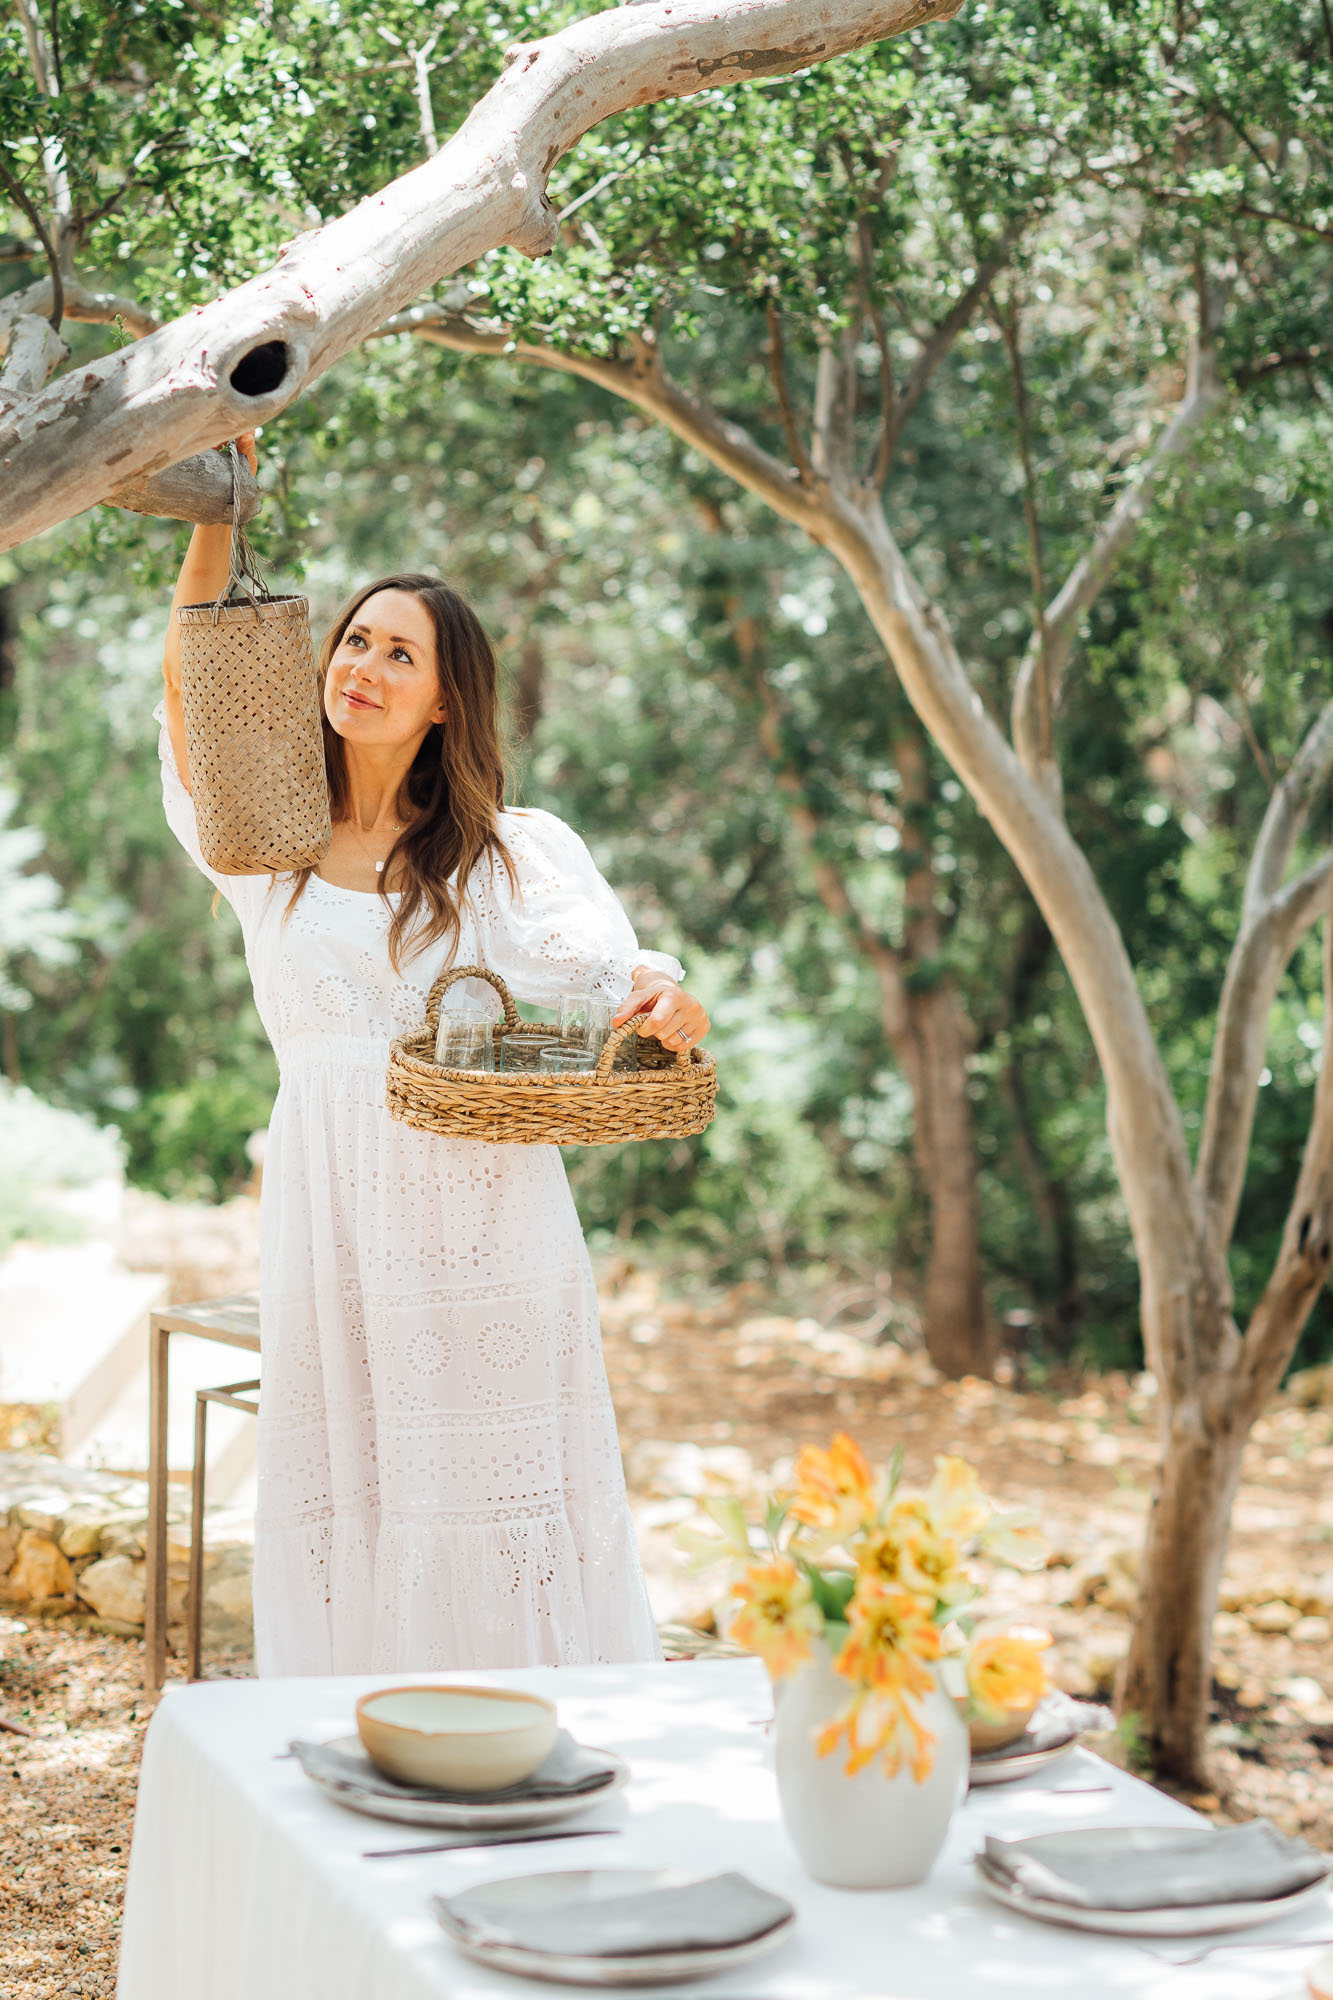 camille hanging lanterns for a backyard summer dinner party